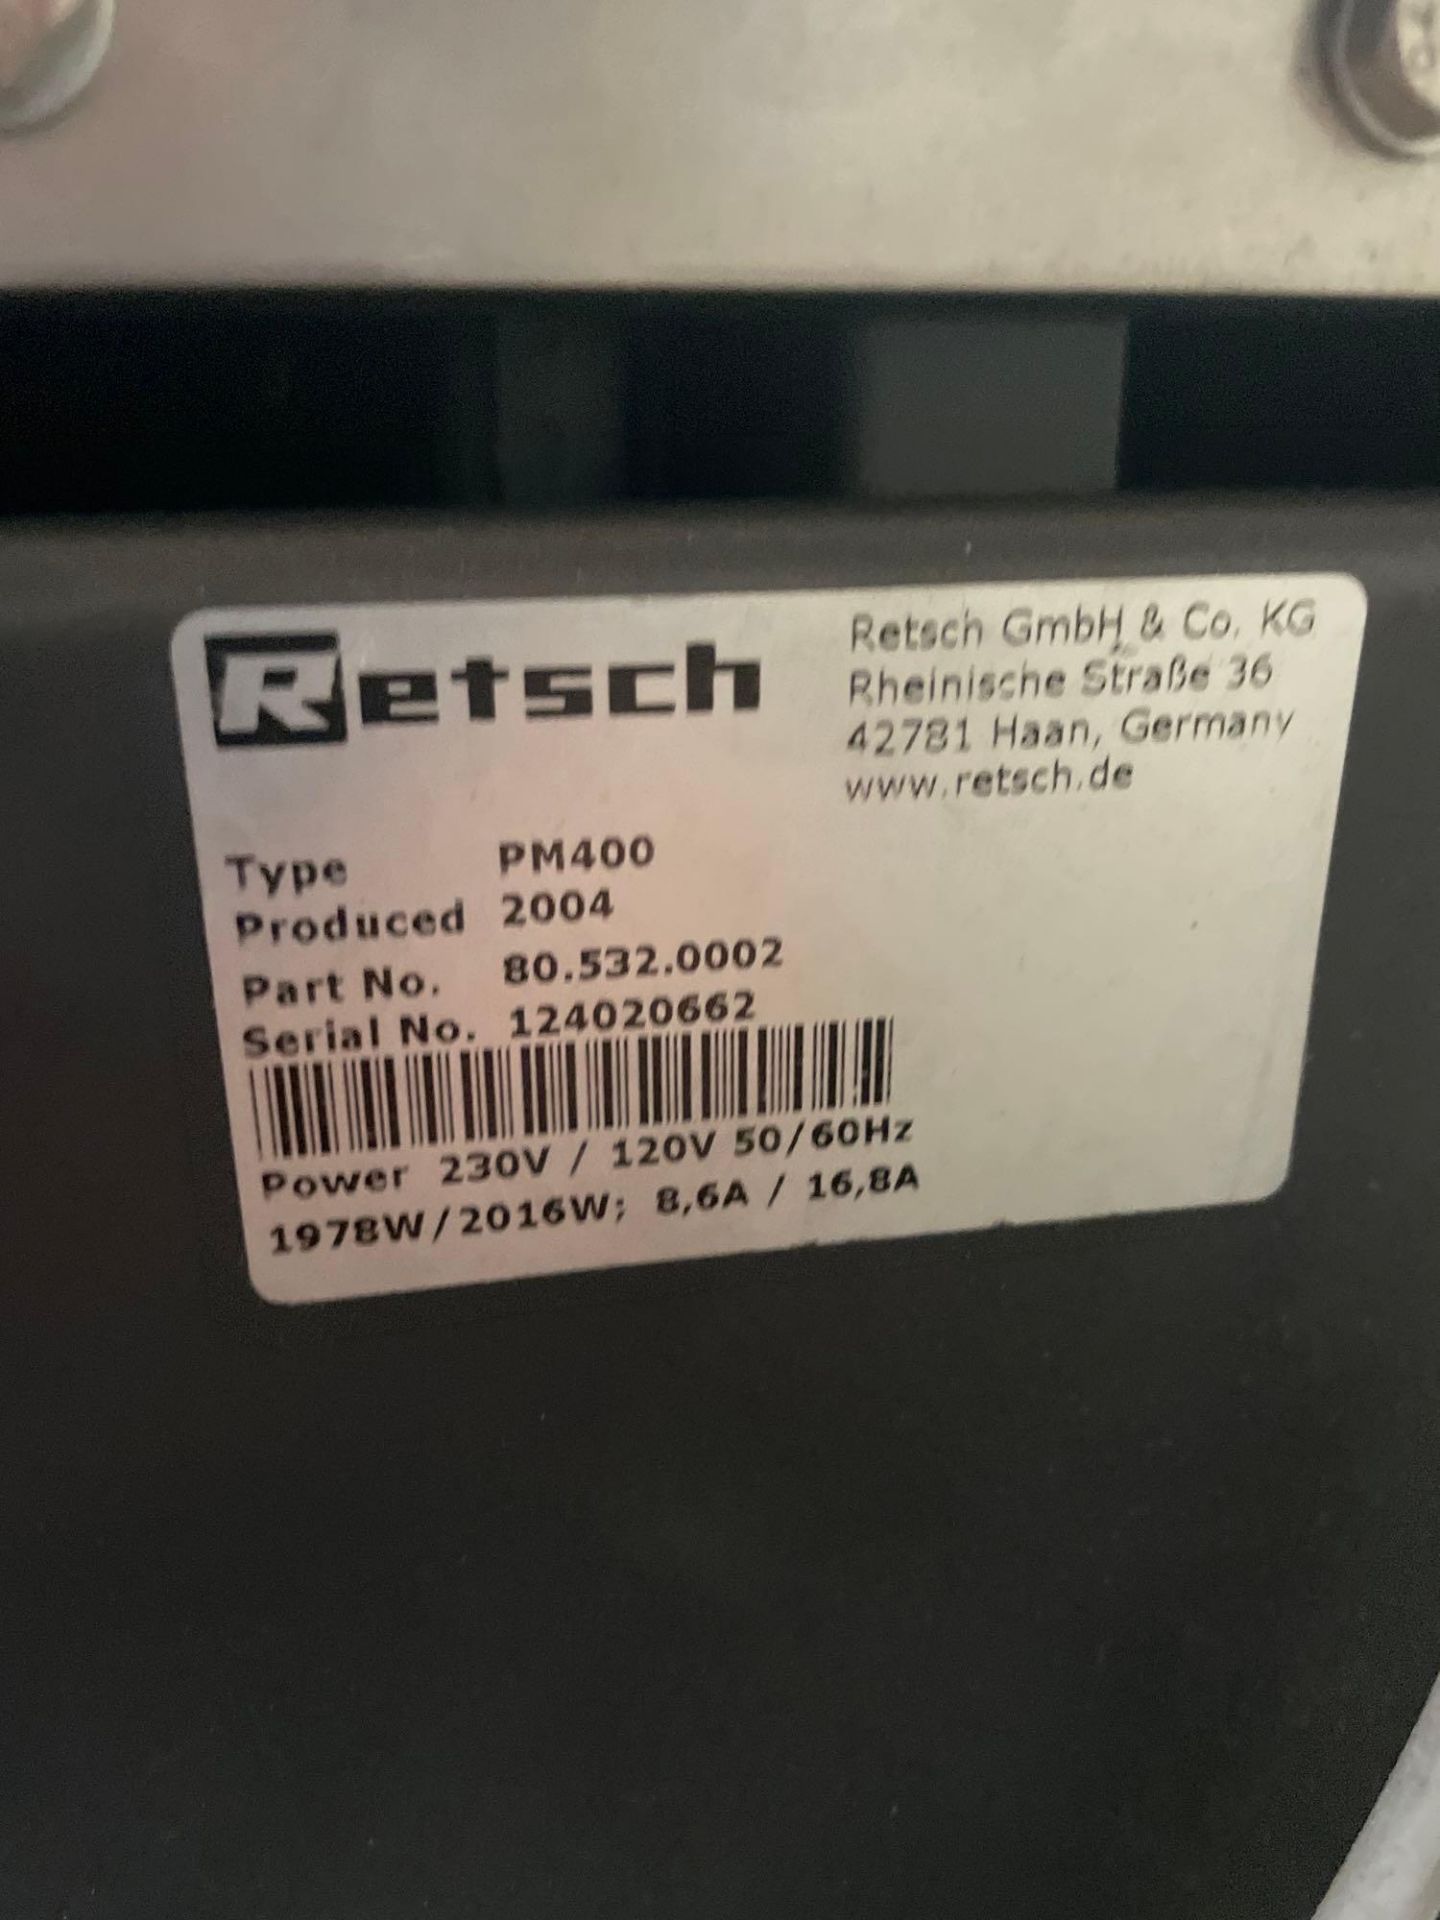 Retsch PM400 Ball Mill w/ 4 Grinding Stations, 220-230V, s/n 124020662, 2004 - Image 5 of 5